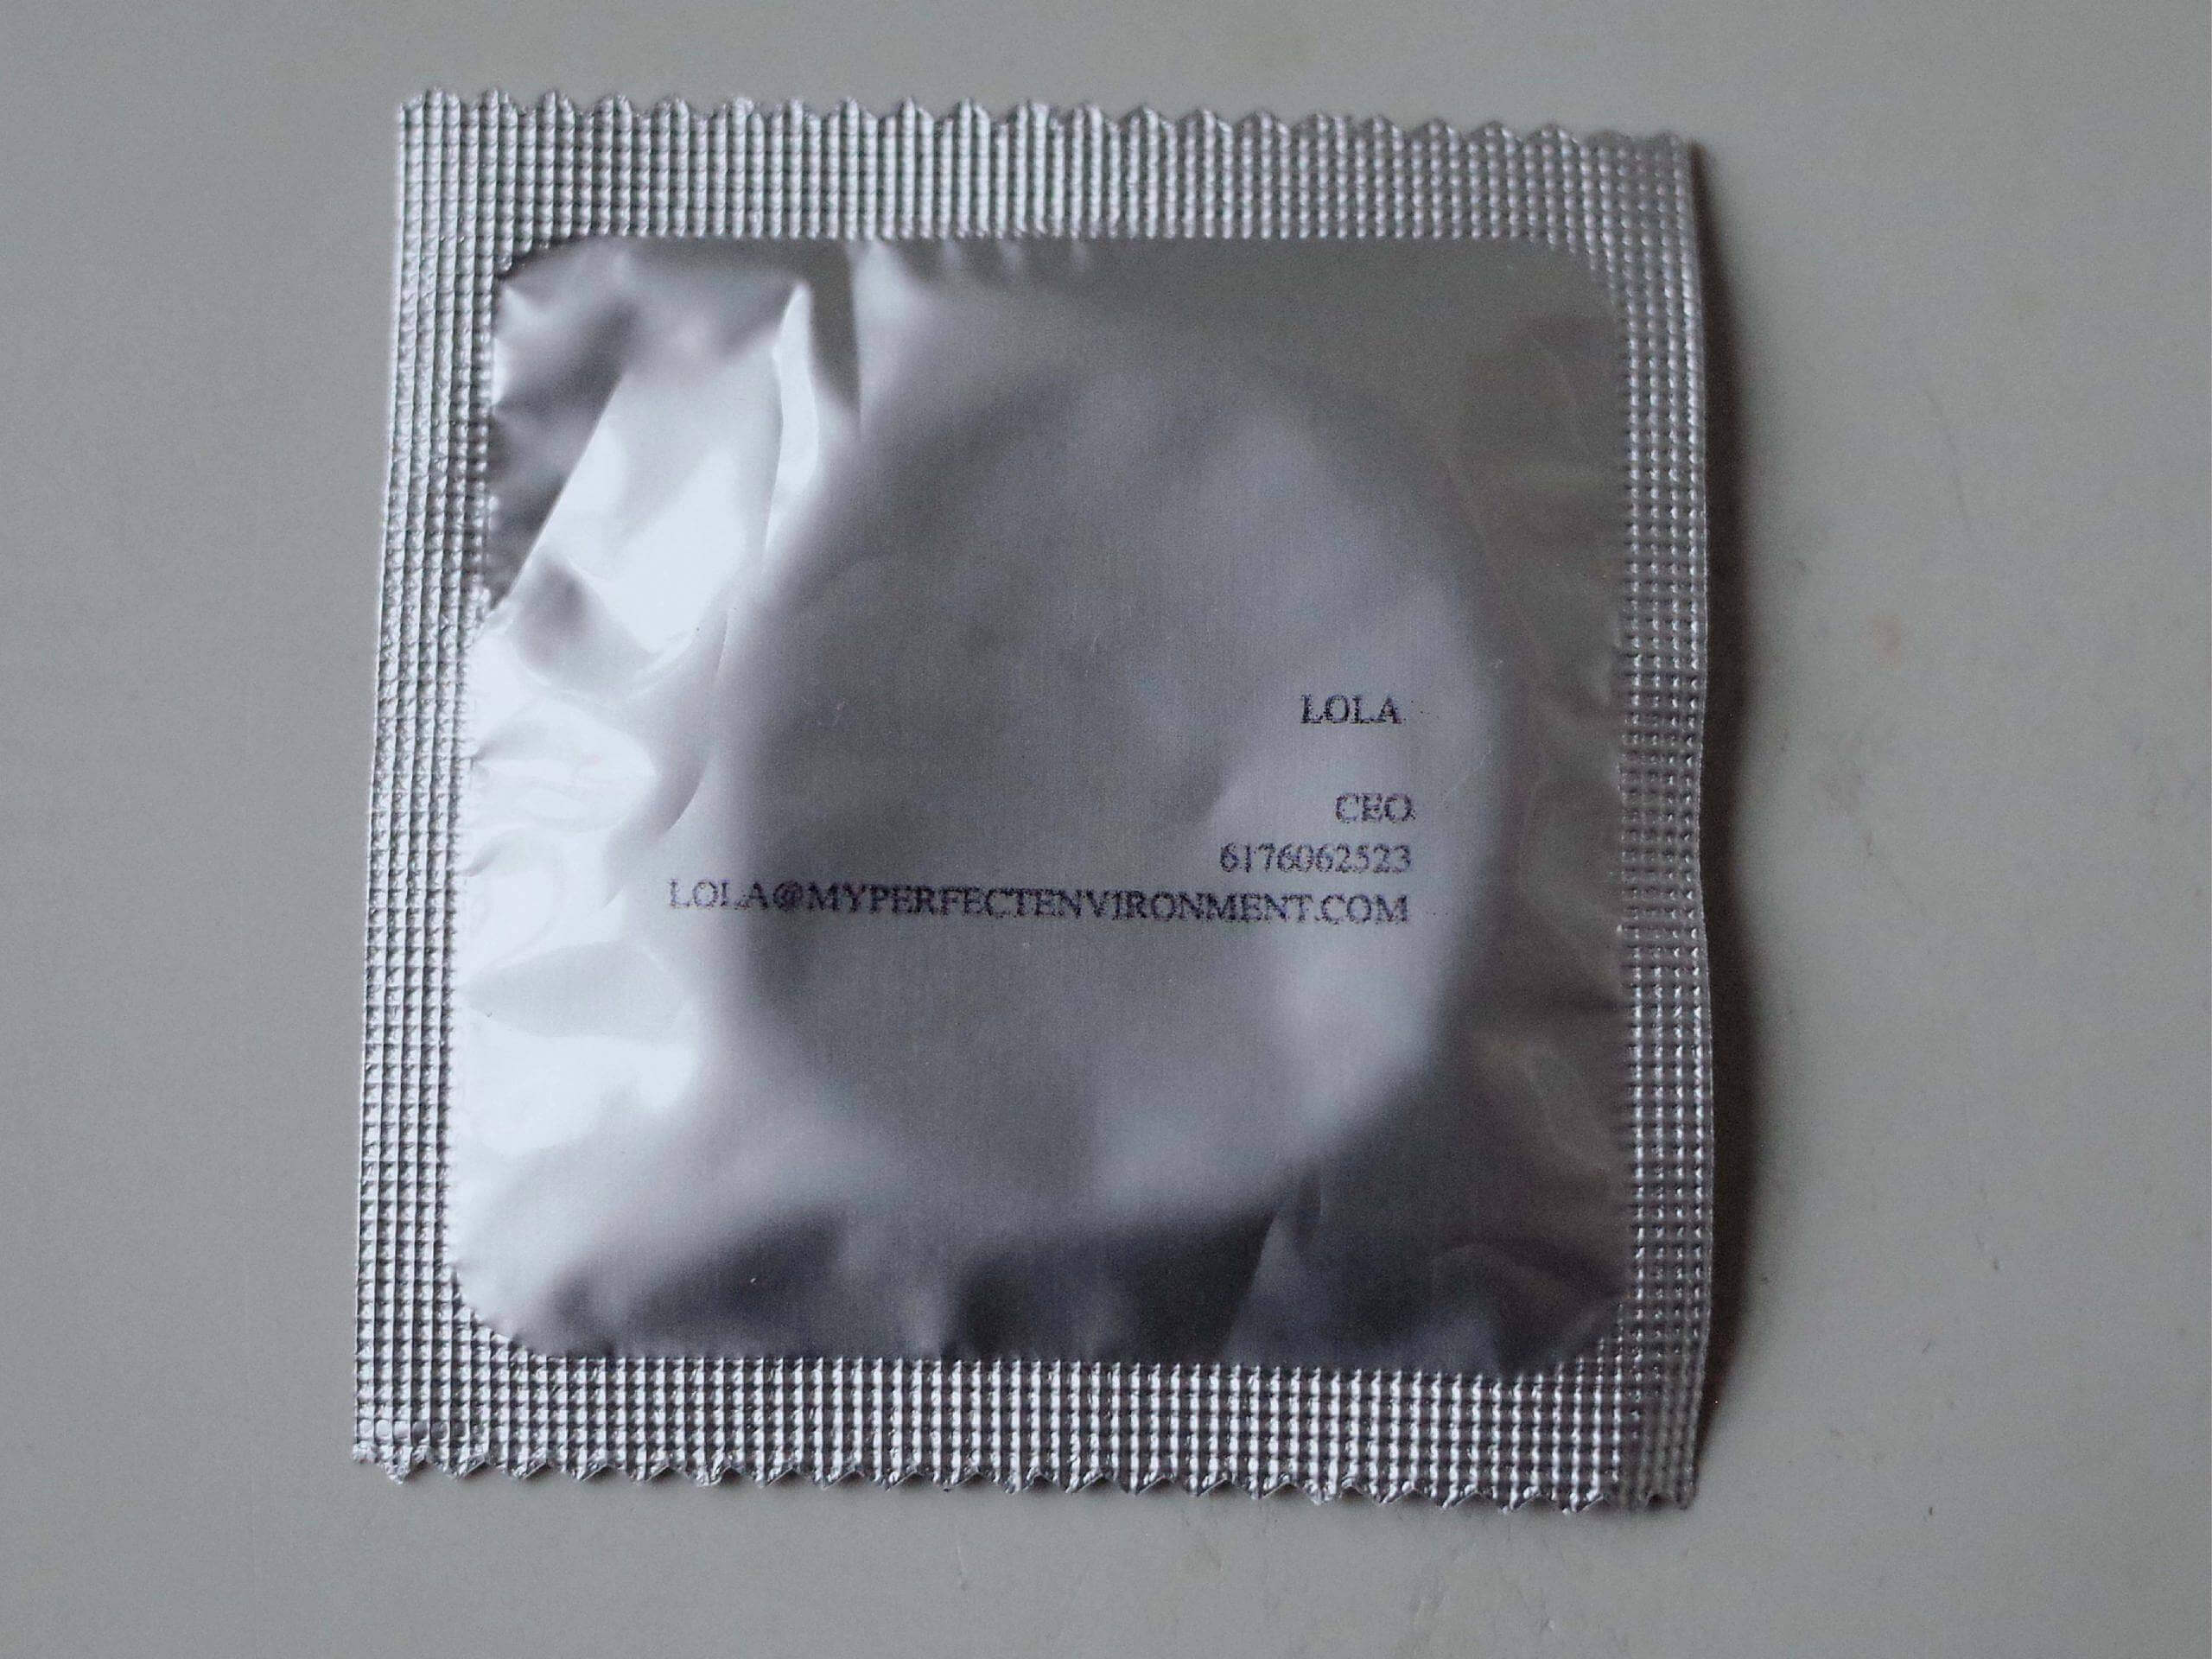 condom wrapper with business card information printed on it